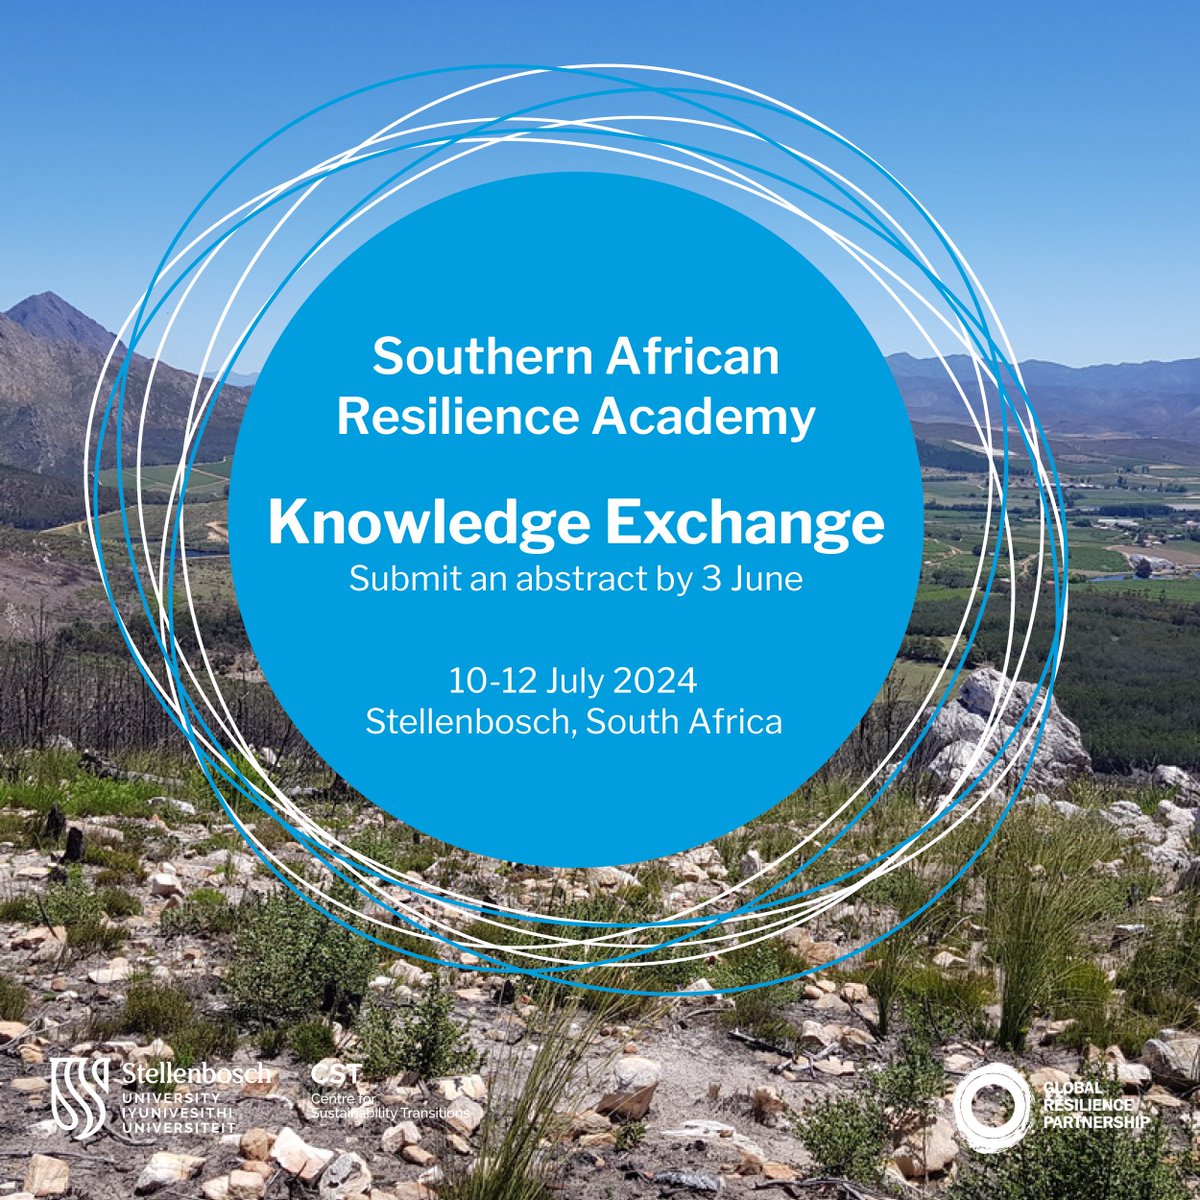 📌 Join the Southern African Resilience Academy (SARA) from 10-12 July for a Knowledge Exchange to unpack the latest thinking on 'Connecting research, policy, and practice for social-ecological resilience' from across the southern African region. 🔗 bit.ly/3UWABKn